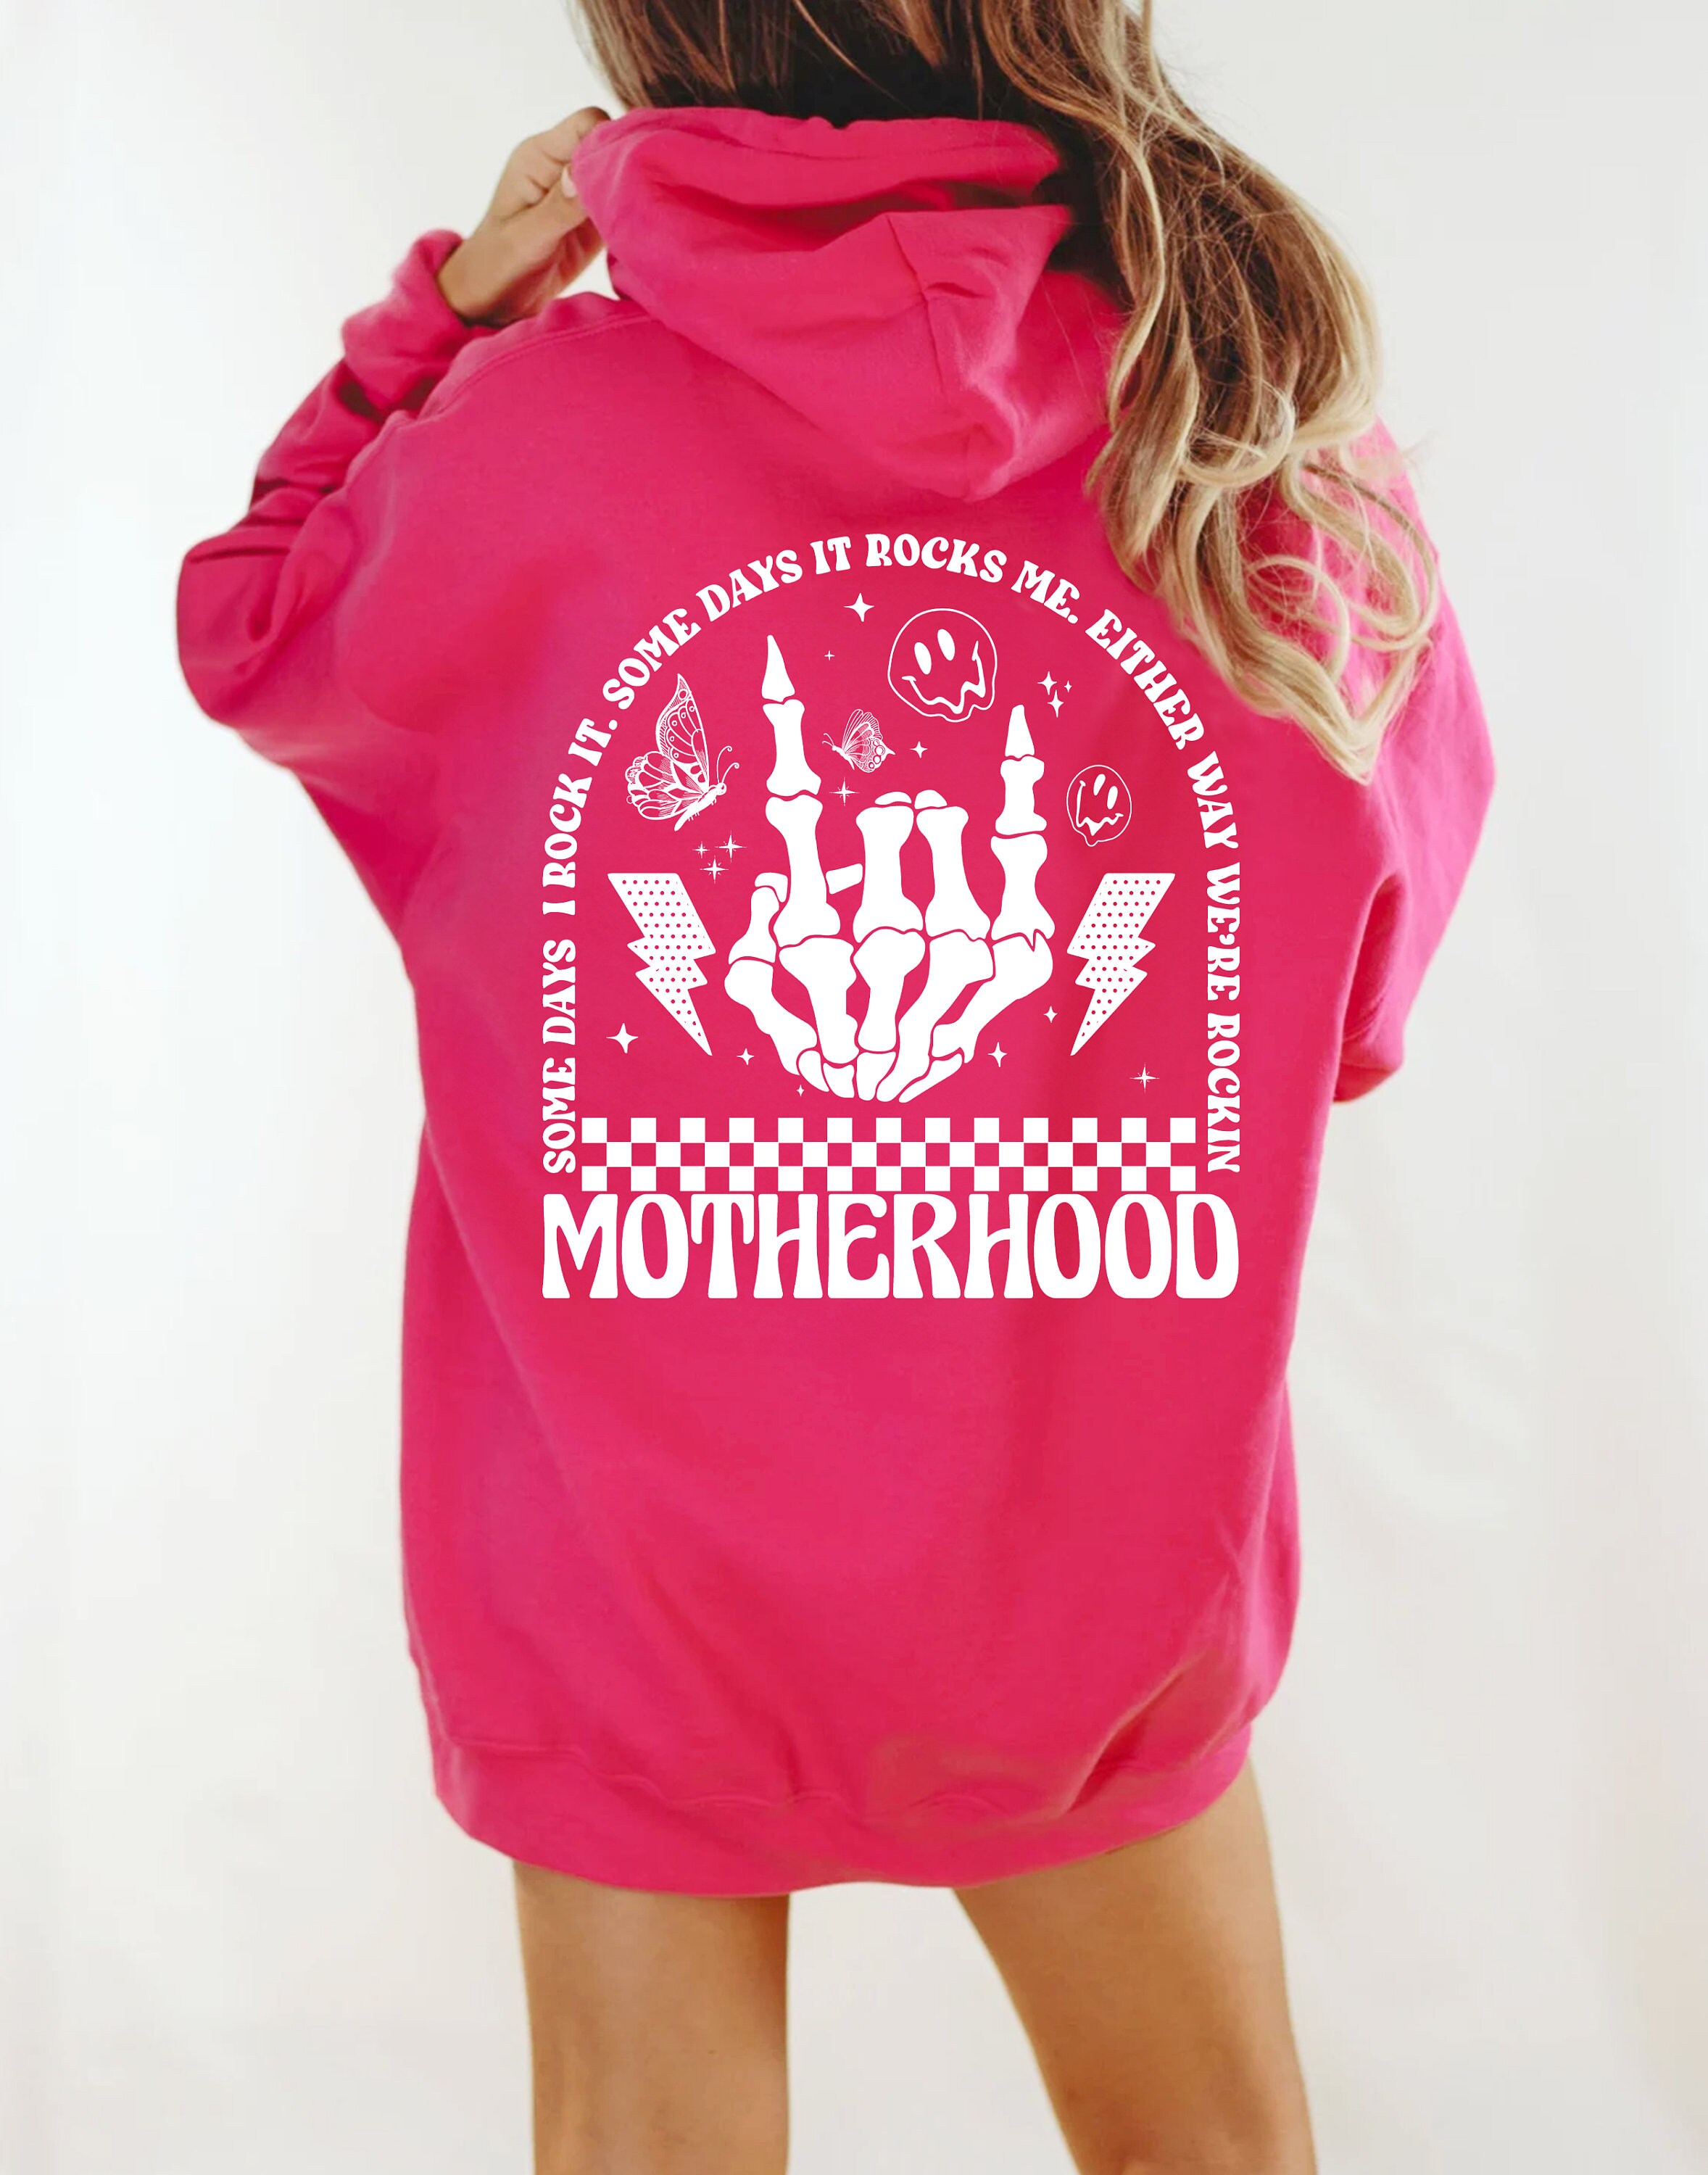 Motherhood Some Day I Rock it Hoodie, Gift for Moms